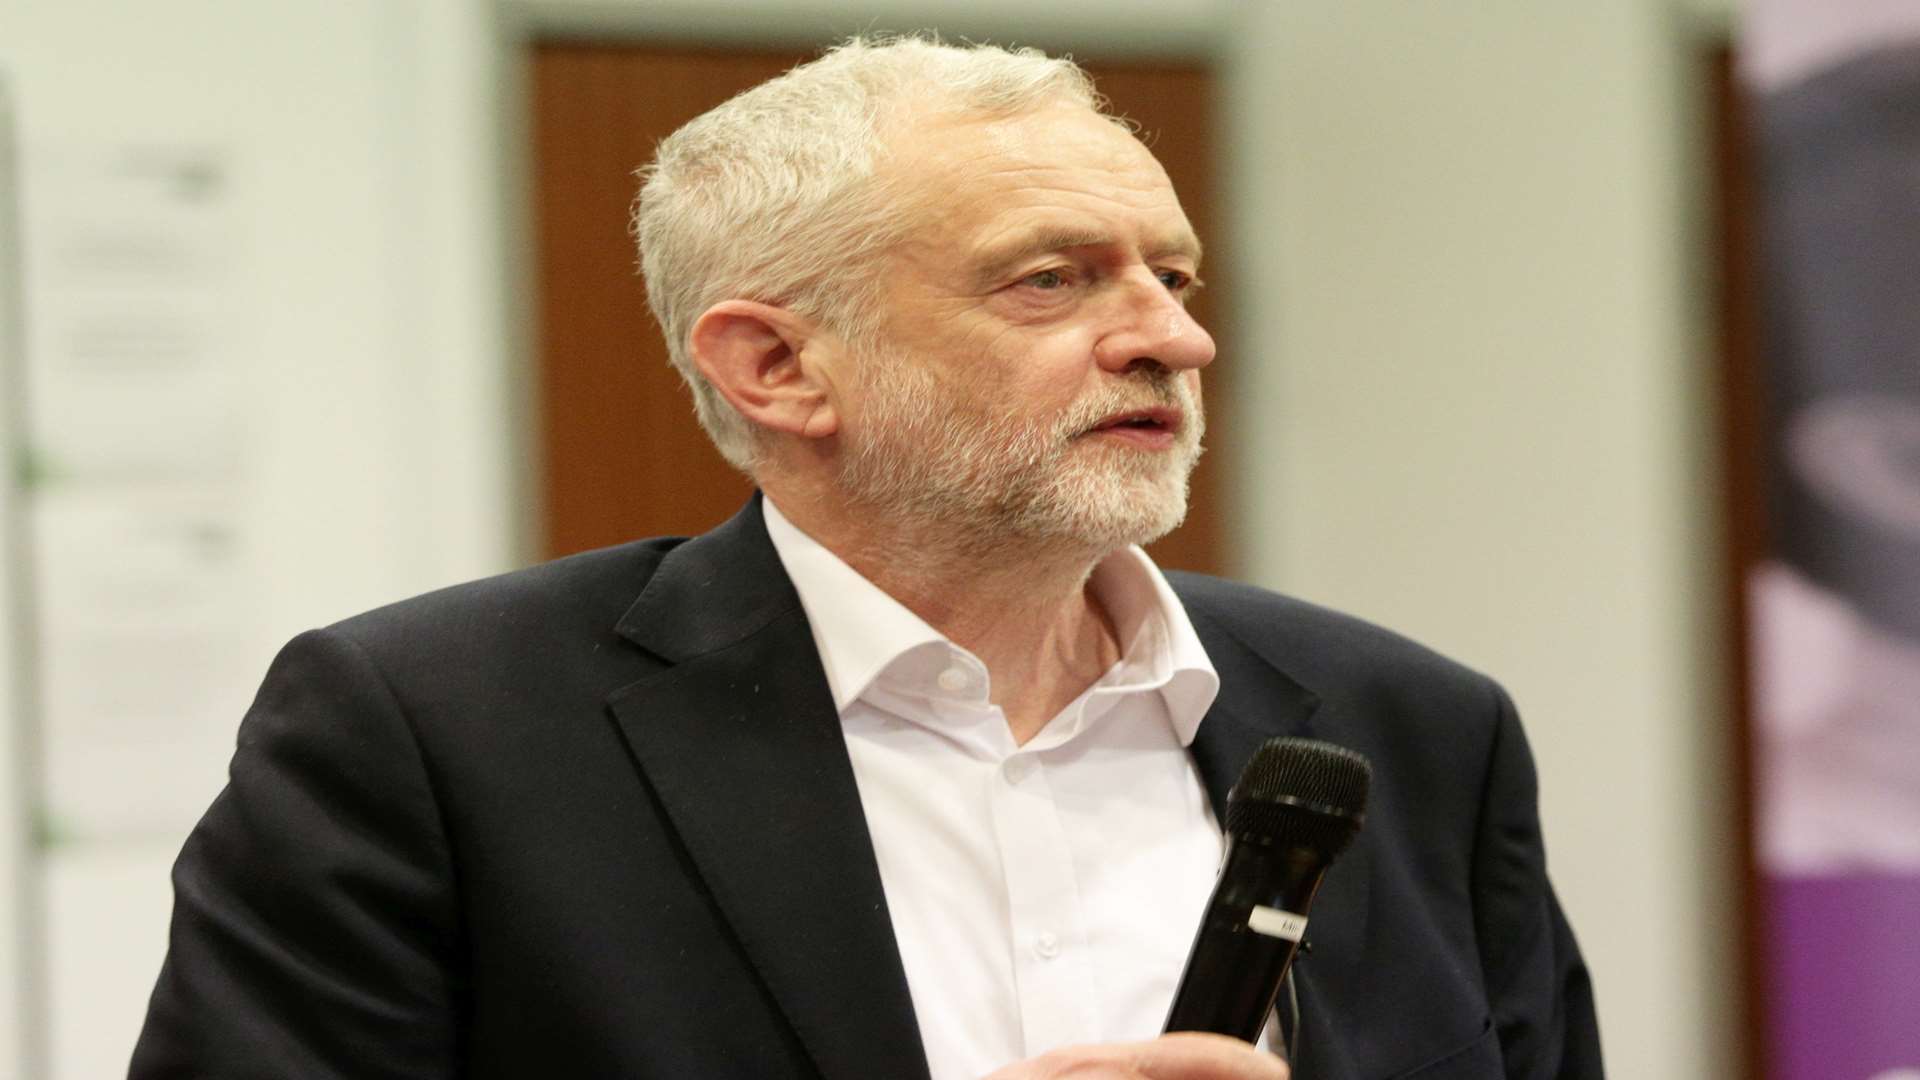 Labour leader Jeremy Corbyn sacked three front-benchers over defying party whip on EU vote.